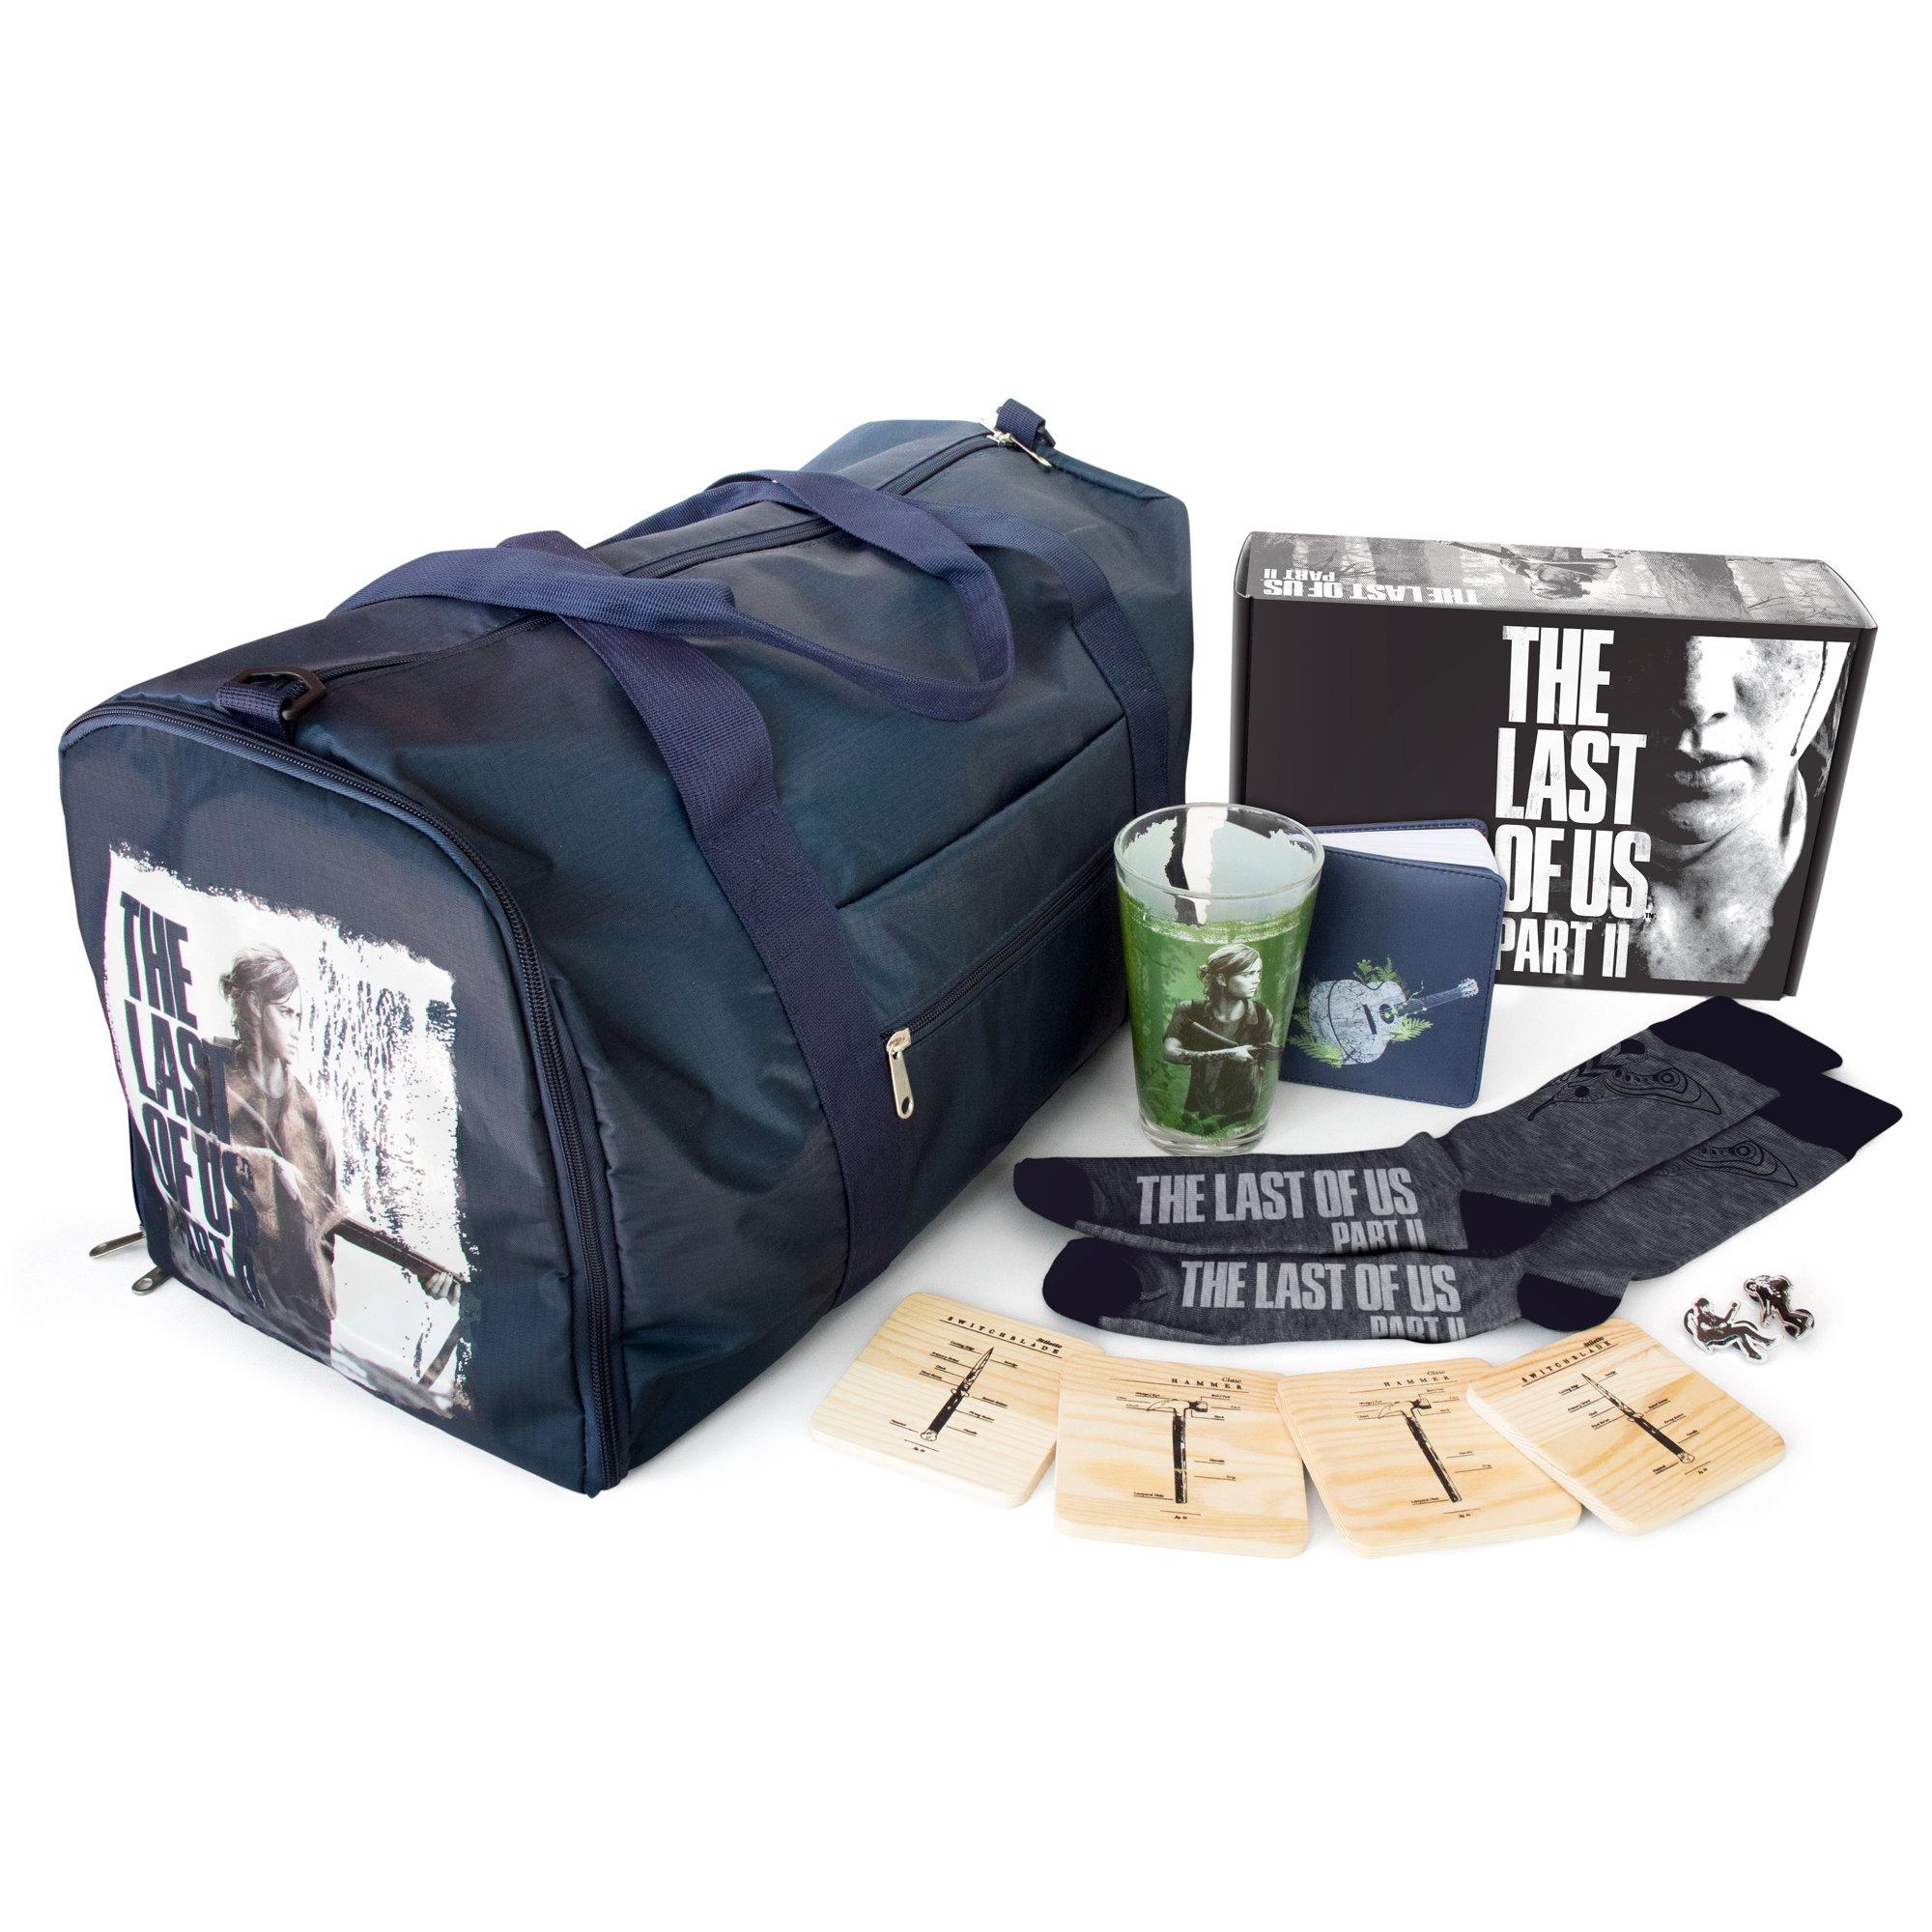 The Last of Us Part II Collector's Box